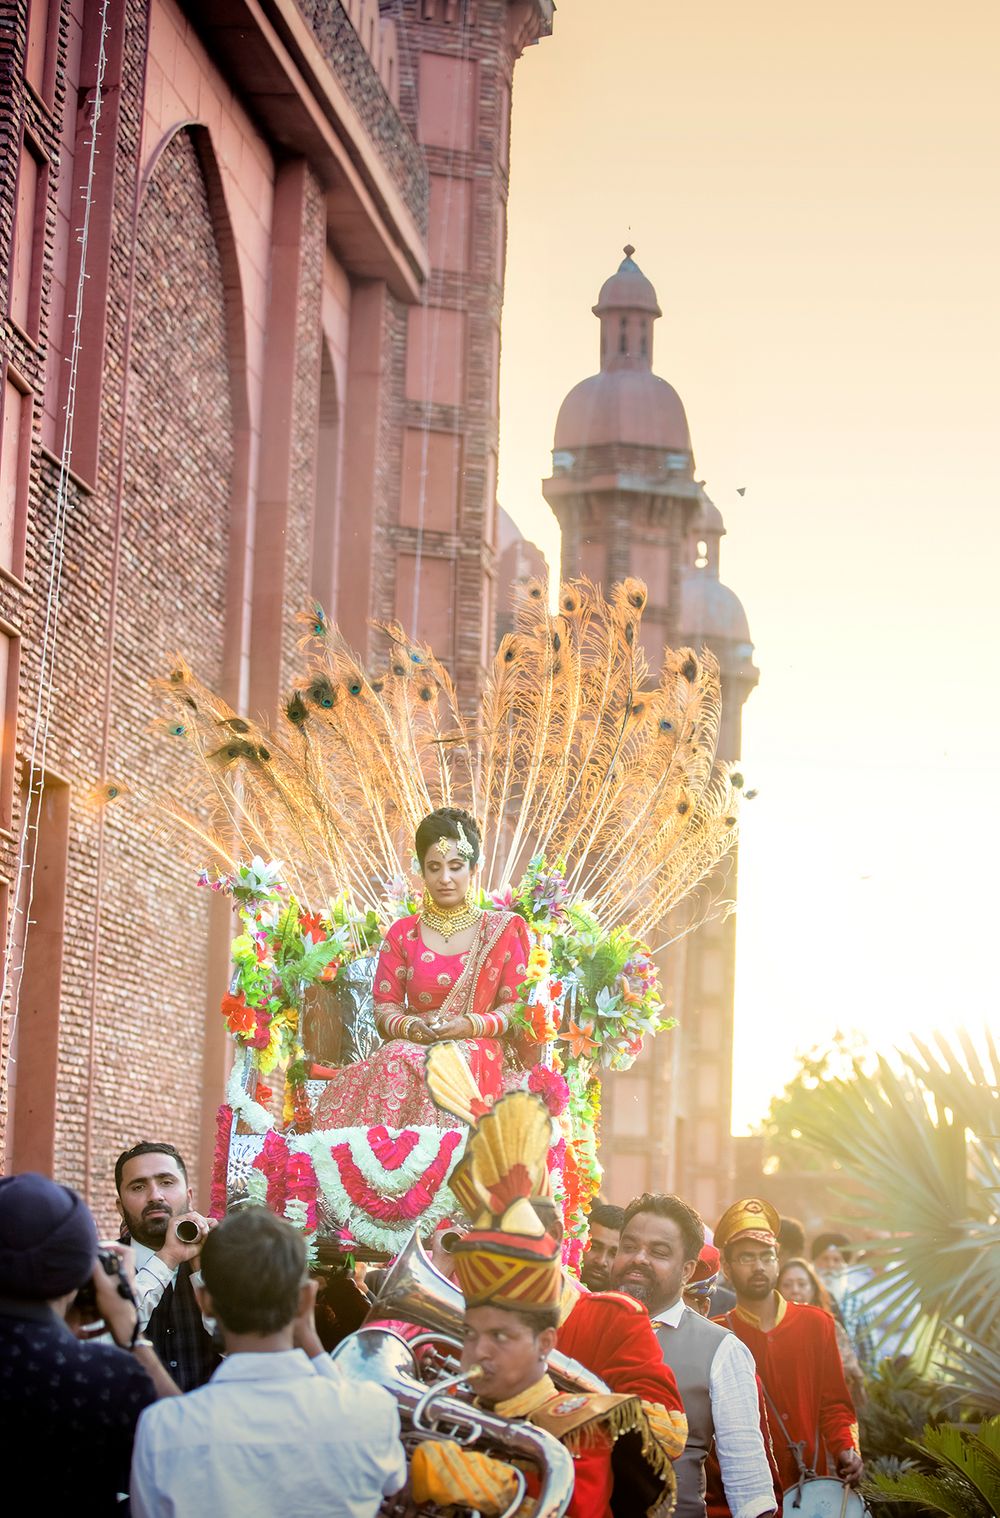 Photo of Bride Entrance in a Peacock Chariot